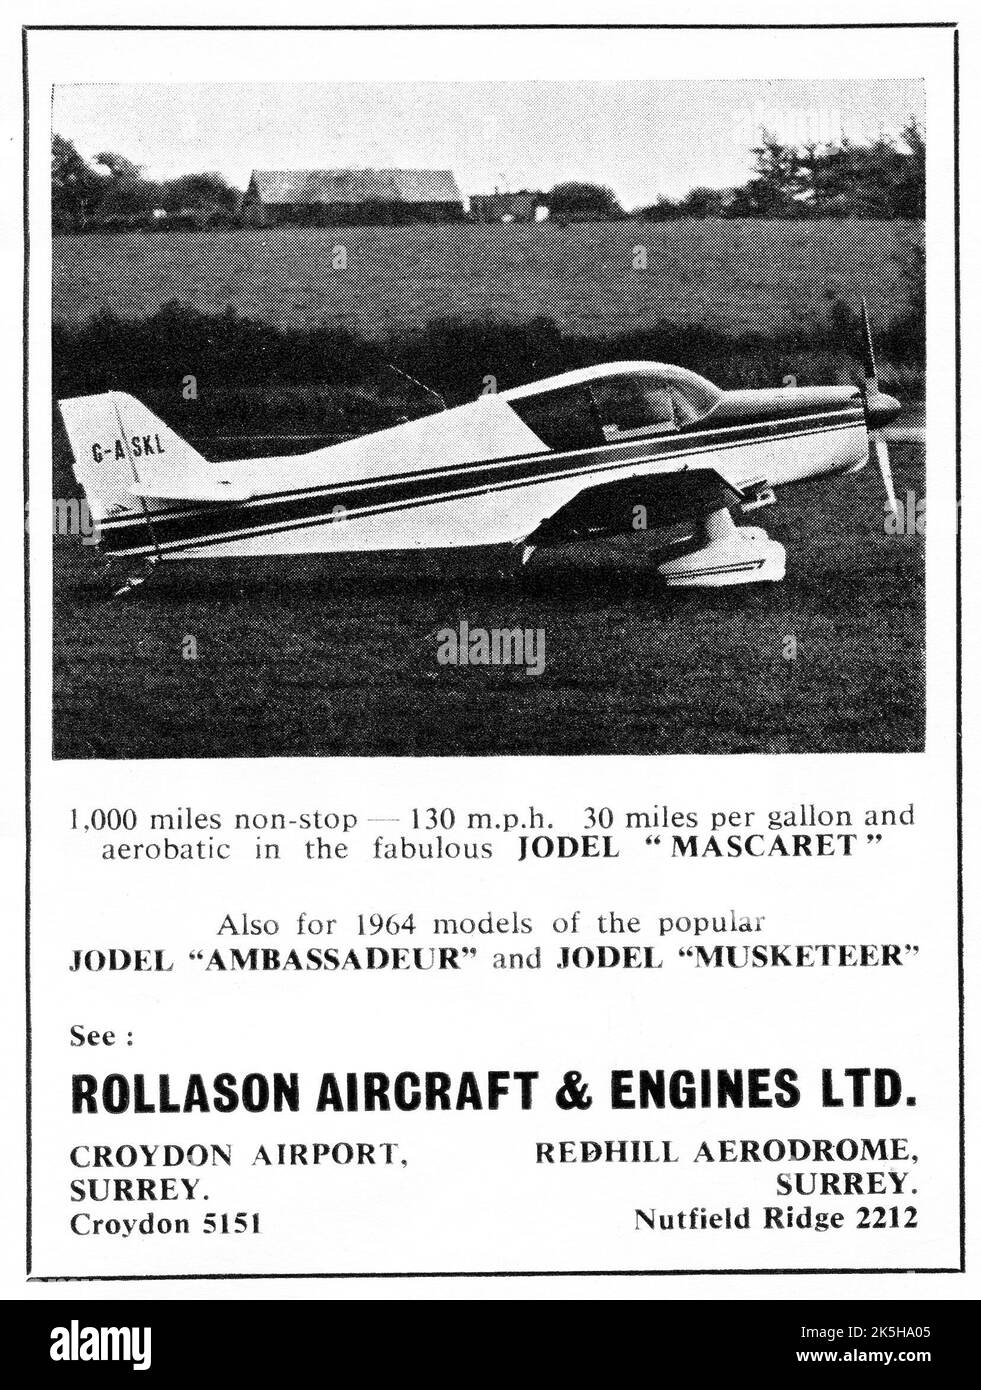 A 1964 advertisement by the British aircraft manufacturer, Rollason Aircraft & Engines Ltd. of Croydon Airport and Redhill Aerodrome, Surrey, promoting their Jodel Mascaret, Ambessadeur and Musketeer light monoplanes. Stock Photo